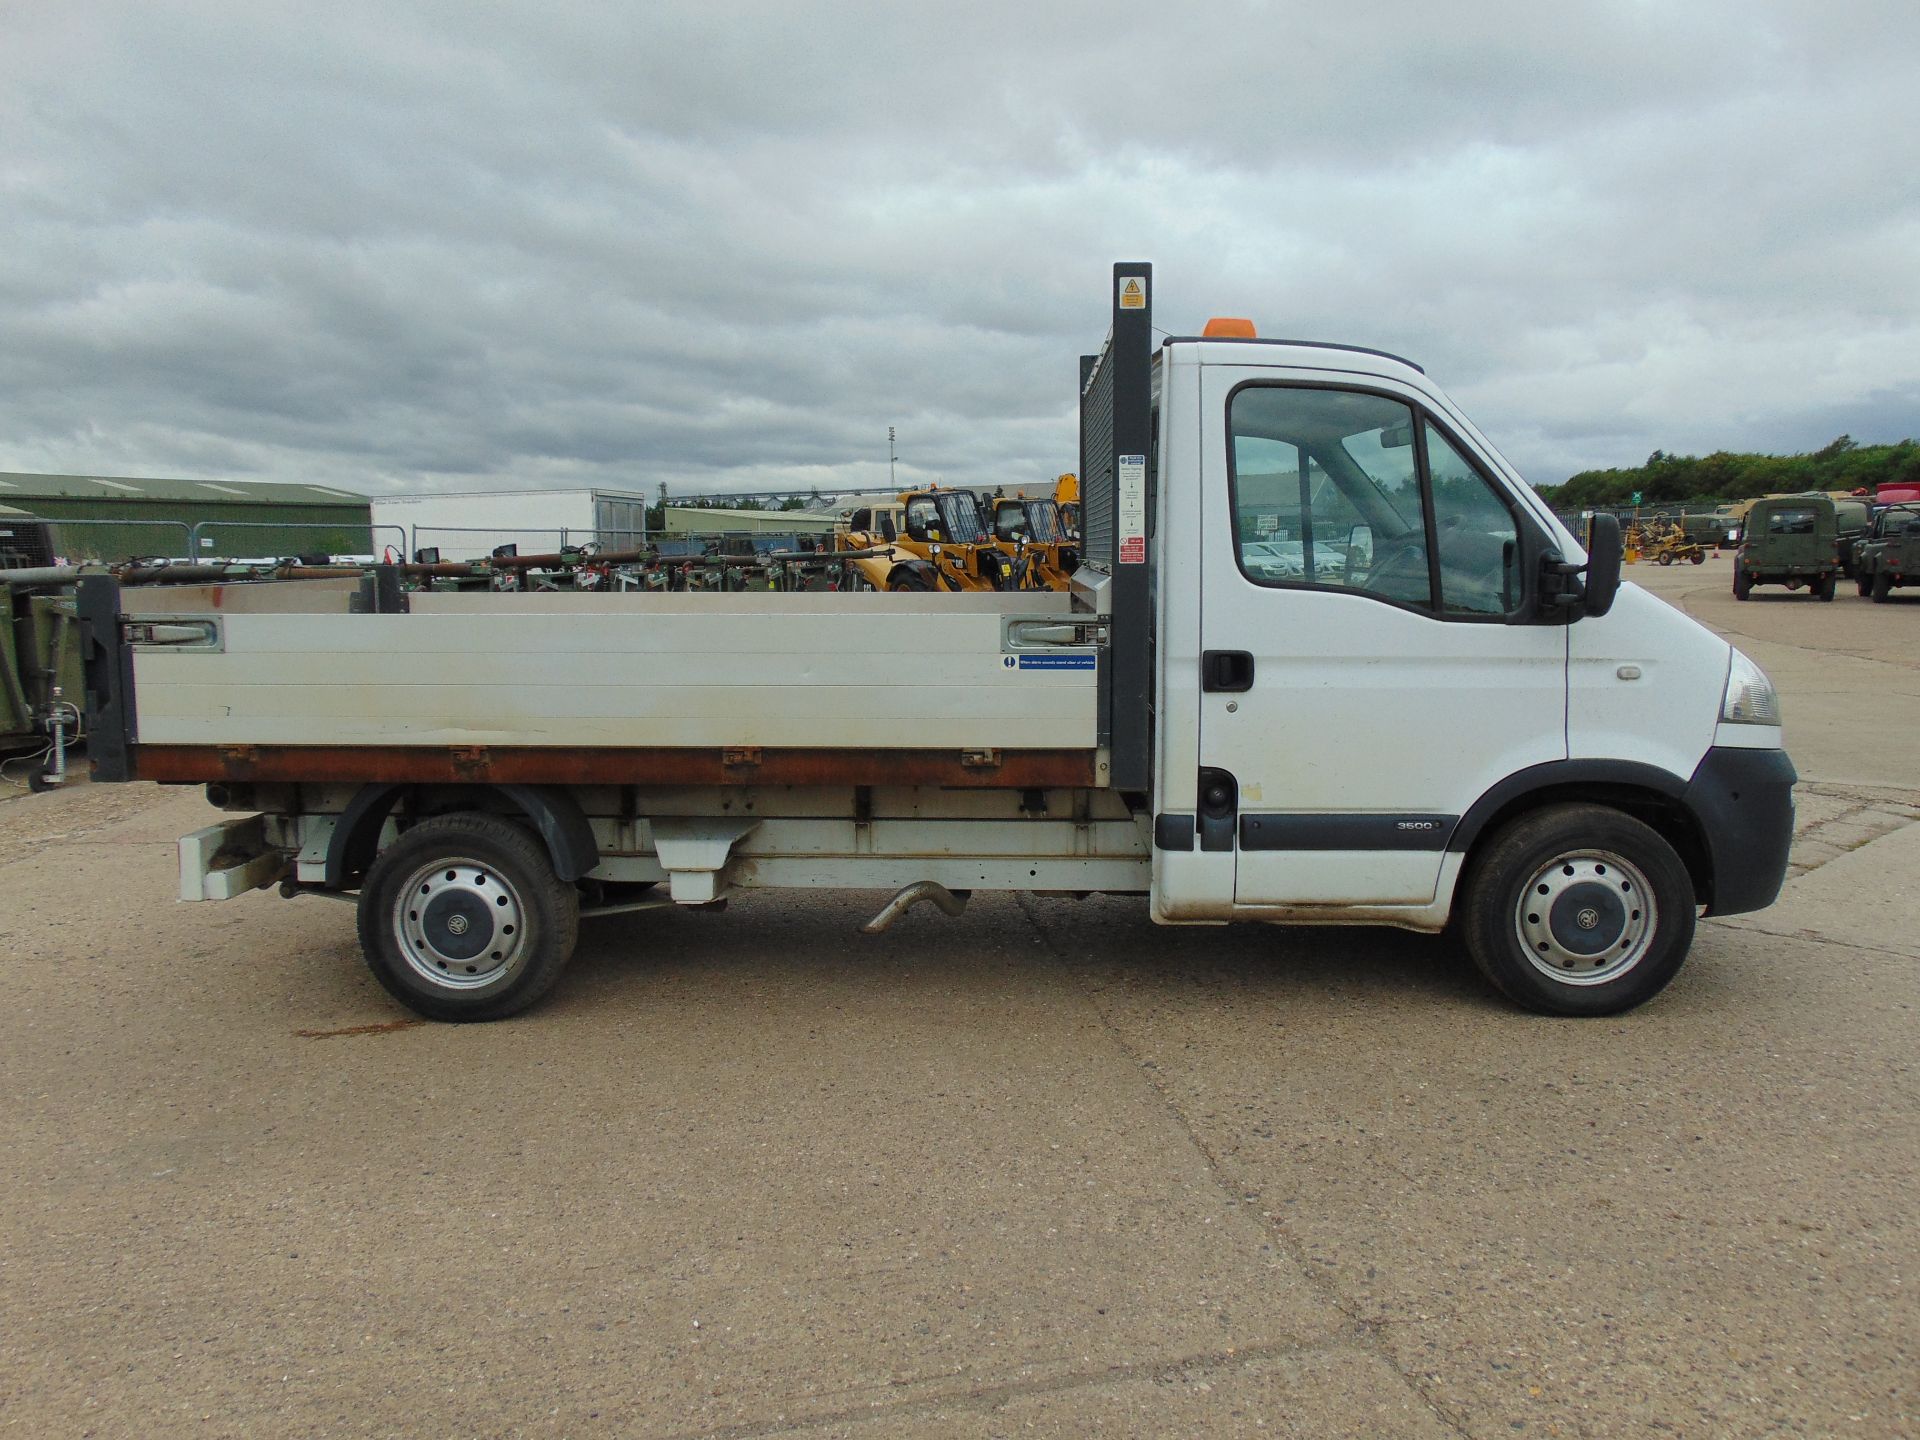 2010 Vauxhall Movano 3500 2.5 CDTi MWB Flat Bed Tipper - Image 6 of 14